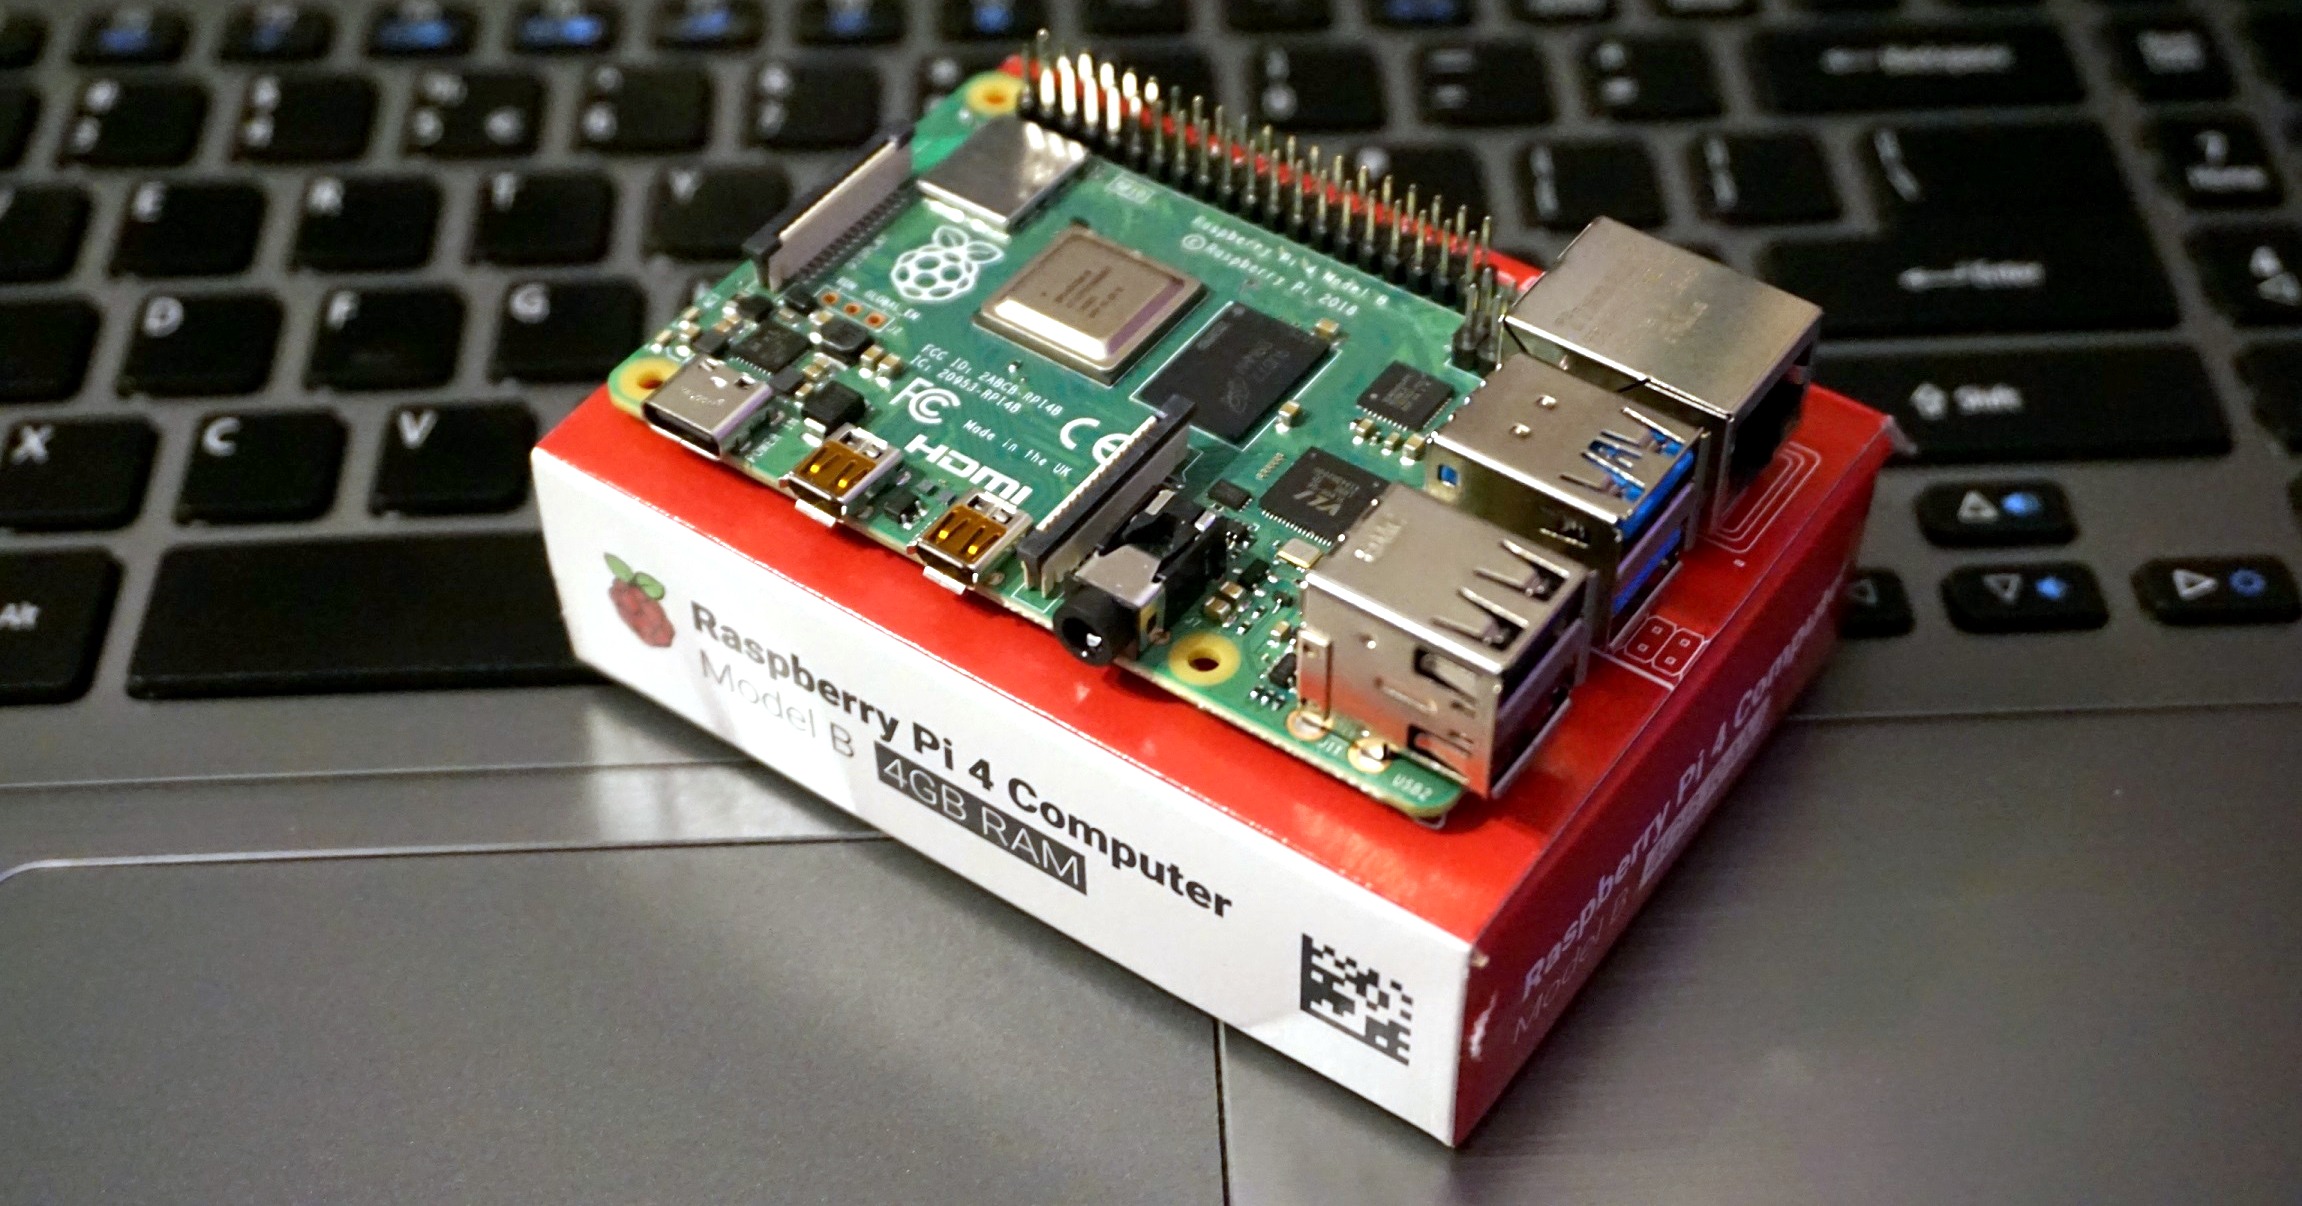 A History of Raspberry Pi Boards